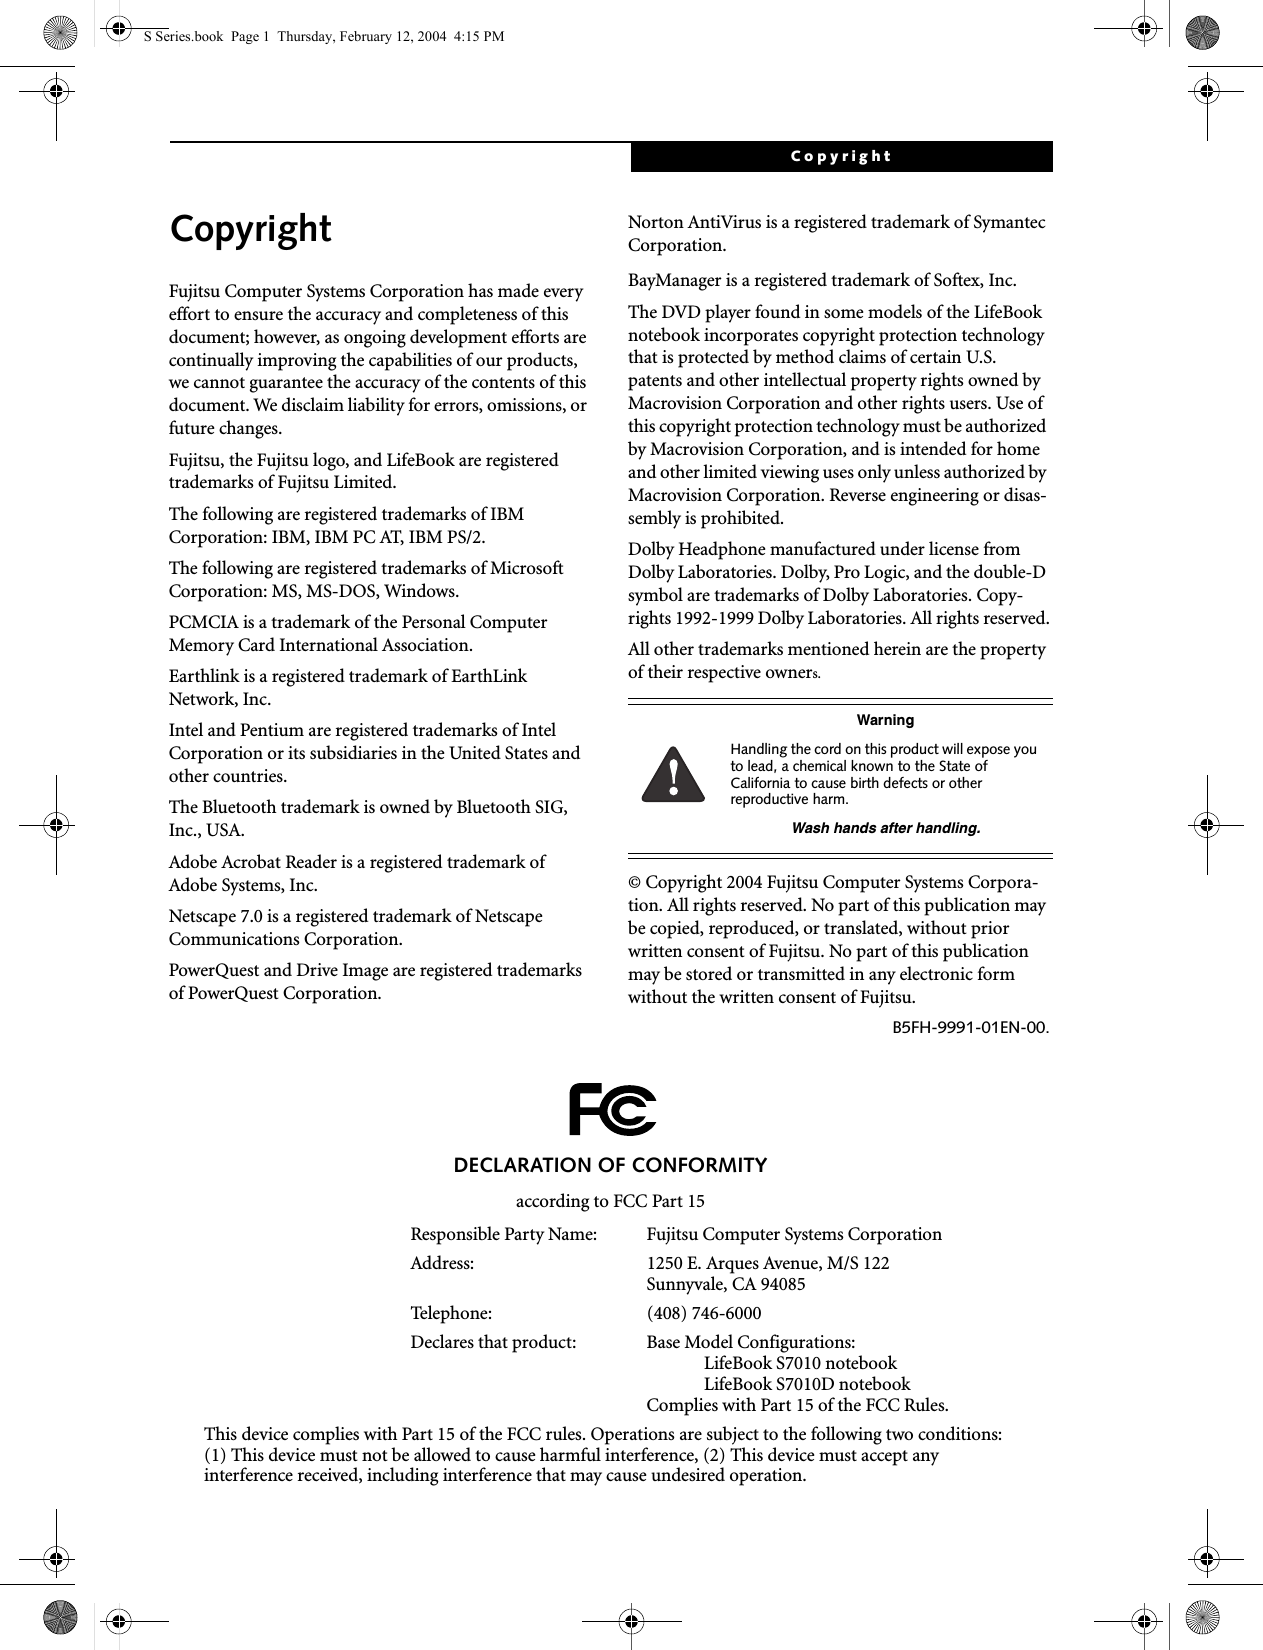 CopyrightCopyrightFujitsu Computer Systems Corporation has made every effort to ensure the accuracy and completeness of this document; however, as ongoing development efforts are continually improving the capabilities of our products, we cannot guarantee the accuracy of the contents of this document. We disclaim liability for errors, omissions, or future changes.Fujitsu, the Fujitsu logo, and LifeBook are registered trademarks of Fujitsu Limited.The following are registered trademarks of IBM Corporation: IBM, IBM PC AT, IBM PS/2. The following are registered trademarks of Microsoft Corporation: MS, MS-DOS, Windows.PCMCIA is a trademark of the Personal Computer Memory Card International Association.Earthlink is a registered trademark of EarthLink Network, Inc. Intel and Pentium are registered trademarks of Intel Corporation or its subsidiaries in the United States and other countries.The Bluetooth trademark is owned by Bluetooth SIG, Inc., USA.Adobe Acrobat Reader is a registered trademark of Adobe Systems, Inc.Netscape 7.0 is a registered trademark of Netscape Communications Corporation.PowerQuest and Drive Image are registered trademarks of PowerQuest Corporation.Norton AntiVirus is a registered trademark of Symantec Corporation.BayManager is a registered trademark of Softex, Inc.The DVD player found in some models of the LifeBook notebook incorporates copyright protection technology that is protected by method claims of certain U.S. patents and other intellectual property rights owned by Macrovision Corporation and other rights users. Use of this copyright protection technology must be authorized by Macrovision Corporation, and is intended for home and other limited viewing uses only unless authorized by Macrovision Corporation. Reverse engineering or disas-sembly is prohibited.Dolby Headphone manufactured under license from Dolby Laboratories. Dolby, Pro Logic, and the double-D symbol are trademarks of Dolby Laboratories. Copy-rights 1992-1999 Dolby Laboratories. All rights reserved.All other trademarks mentioned herein are the property of their respective owners.© Copyright 2004 Fujitsu Computer Systems Corpora-tion. All rights reserved. No part of this publication may be copied, reproduced, or translated, without prior written consent of Fujitsu. No part of this publication may be stored or transmitted in any electronic form without the written consent of Fujitsu.B5FH-9991-01EN-00.WarningHandling the cord on this product will expose you to lead, a chemical known to the State of California to cause birth defects or other reproductive harm. Wash hands after handling.DECLARATION OF CONFORMITYaccording to FCC Part 15Responsible Party Name: Fujitsu Computer Systems CorporationAddress:  1250 E. Arques Avenue, M/S 122Sunnyvale, CA 94085Telephone: (408) 746-6000Declares that product: Base Model Configurations:LifeBook S7010 notebookLifeBook S7010D notebookComplies with Part 15 of the FCC Rules.This device complies with Part 15 of the FCC rules. Operations are subject to the following two conditions:(1) This device must not be allowed to cause harmful interference, (2) This device must accept anyinterference received, including interference that may cause undesired operation.S Series.book  Page 1  Thursday, February 12, 2004  4:15 PM